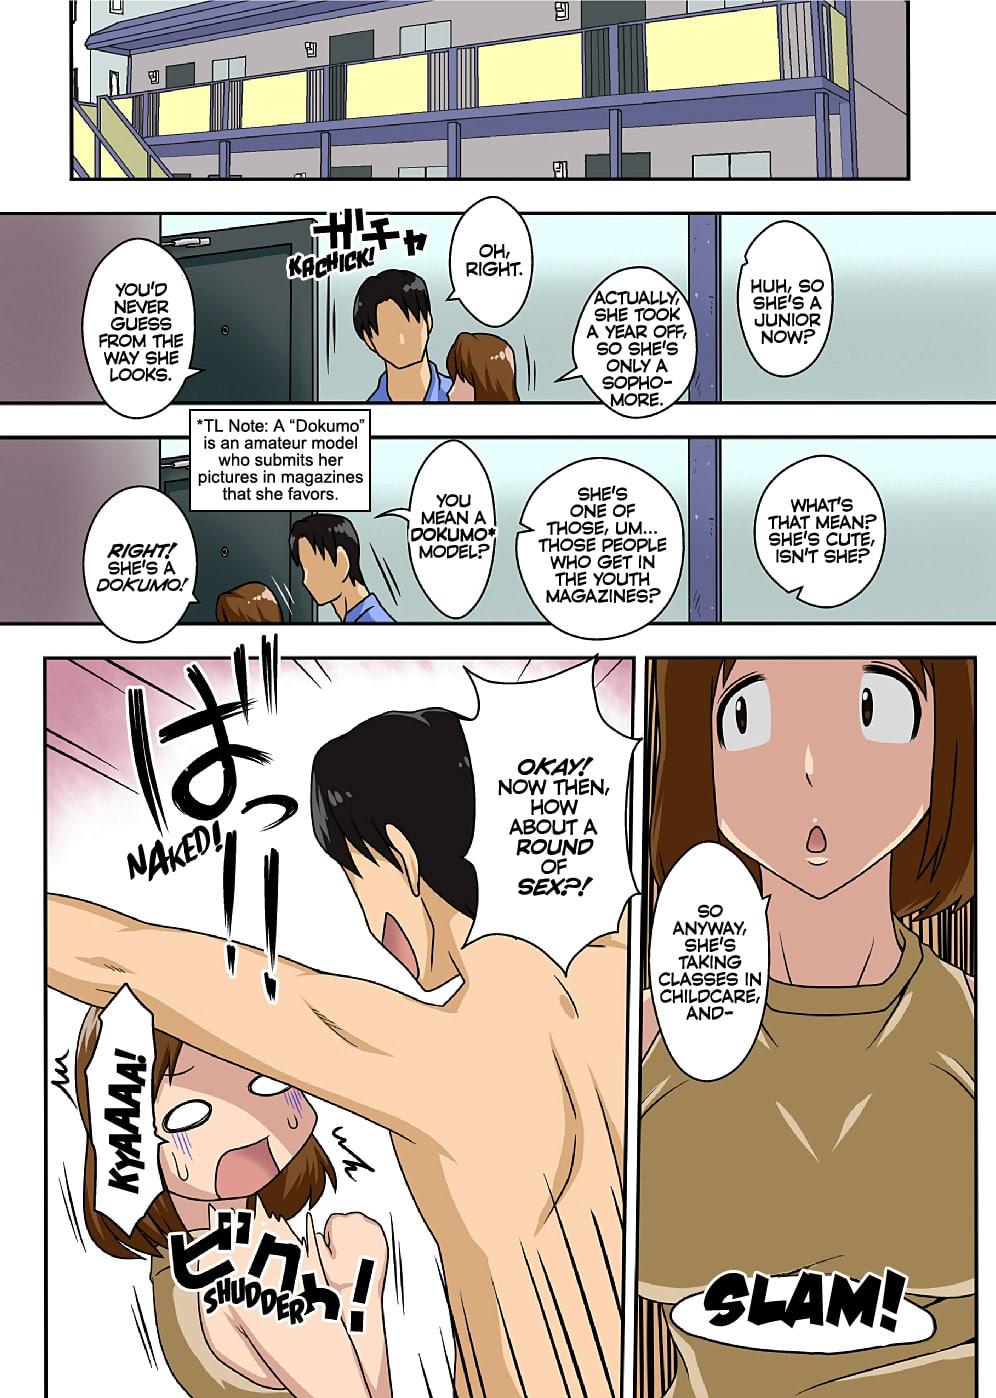 Australian [Freehand Tamashii] Toiu wake de Kaa-san to Kyou mo Bed no Uede, Hada o Awaseru Omo ni Hageshiku | For this Reason I'm Going to be Grinding Intensively Skin-to-Skin Against my Mom Again Today in Bed [English] {ultimaflaral} Gay Straig - Page 7